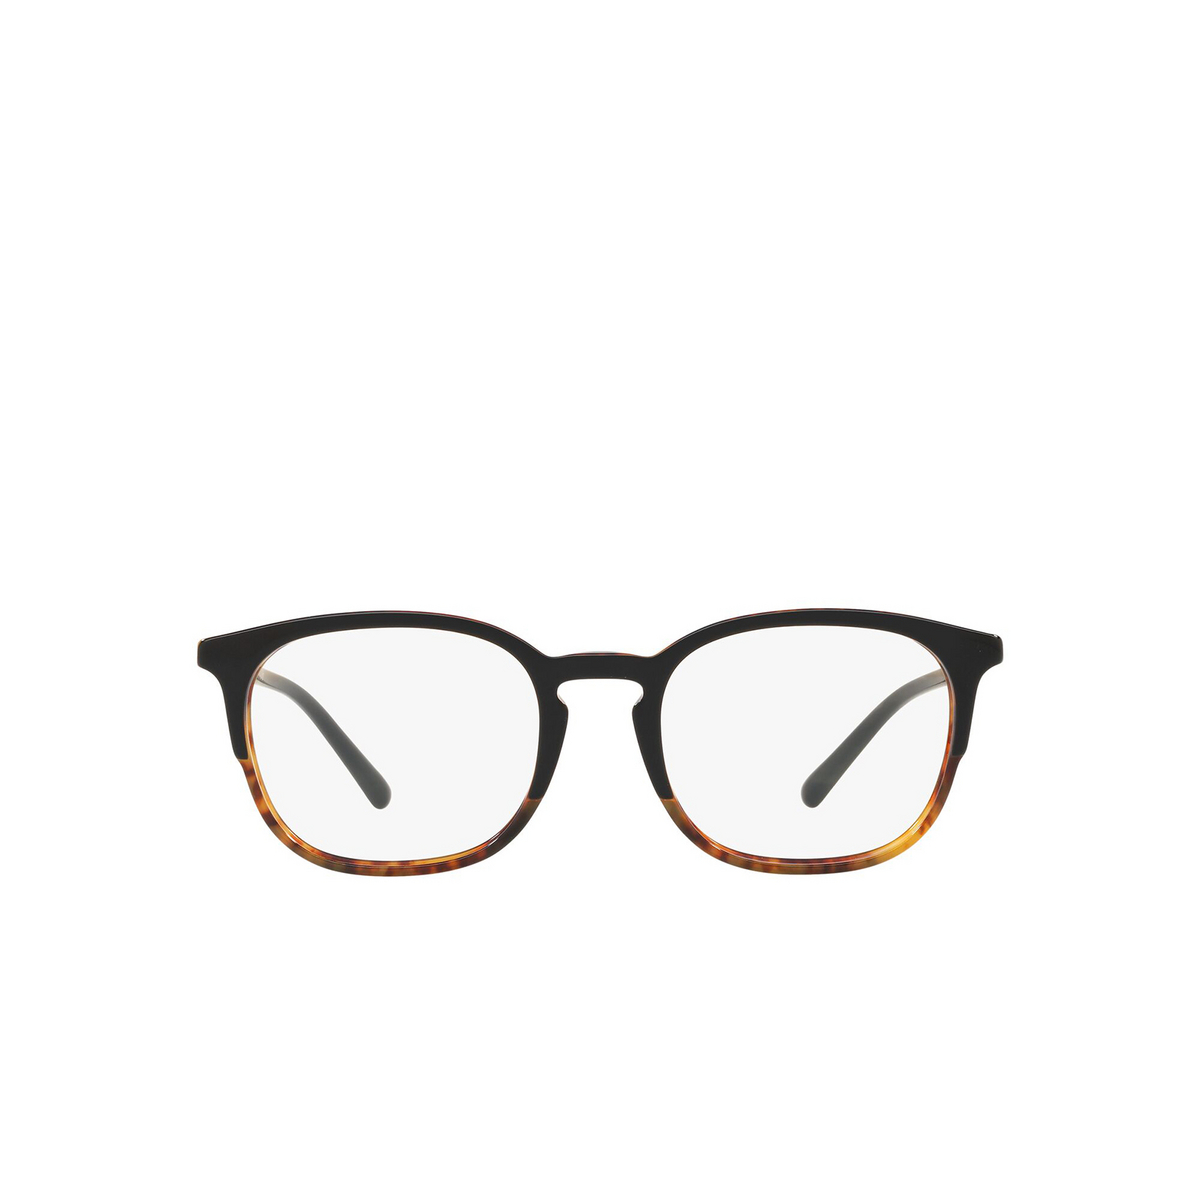 Burberry® Square Eyeglasses: BE2272 color Top Black On Havana 3721 - front view.